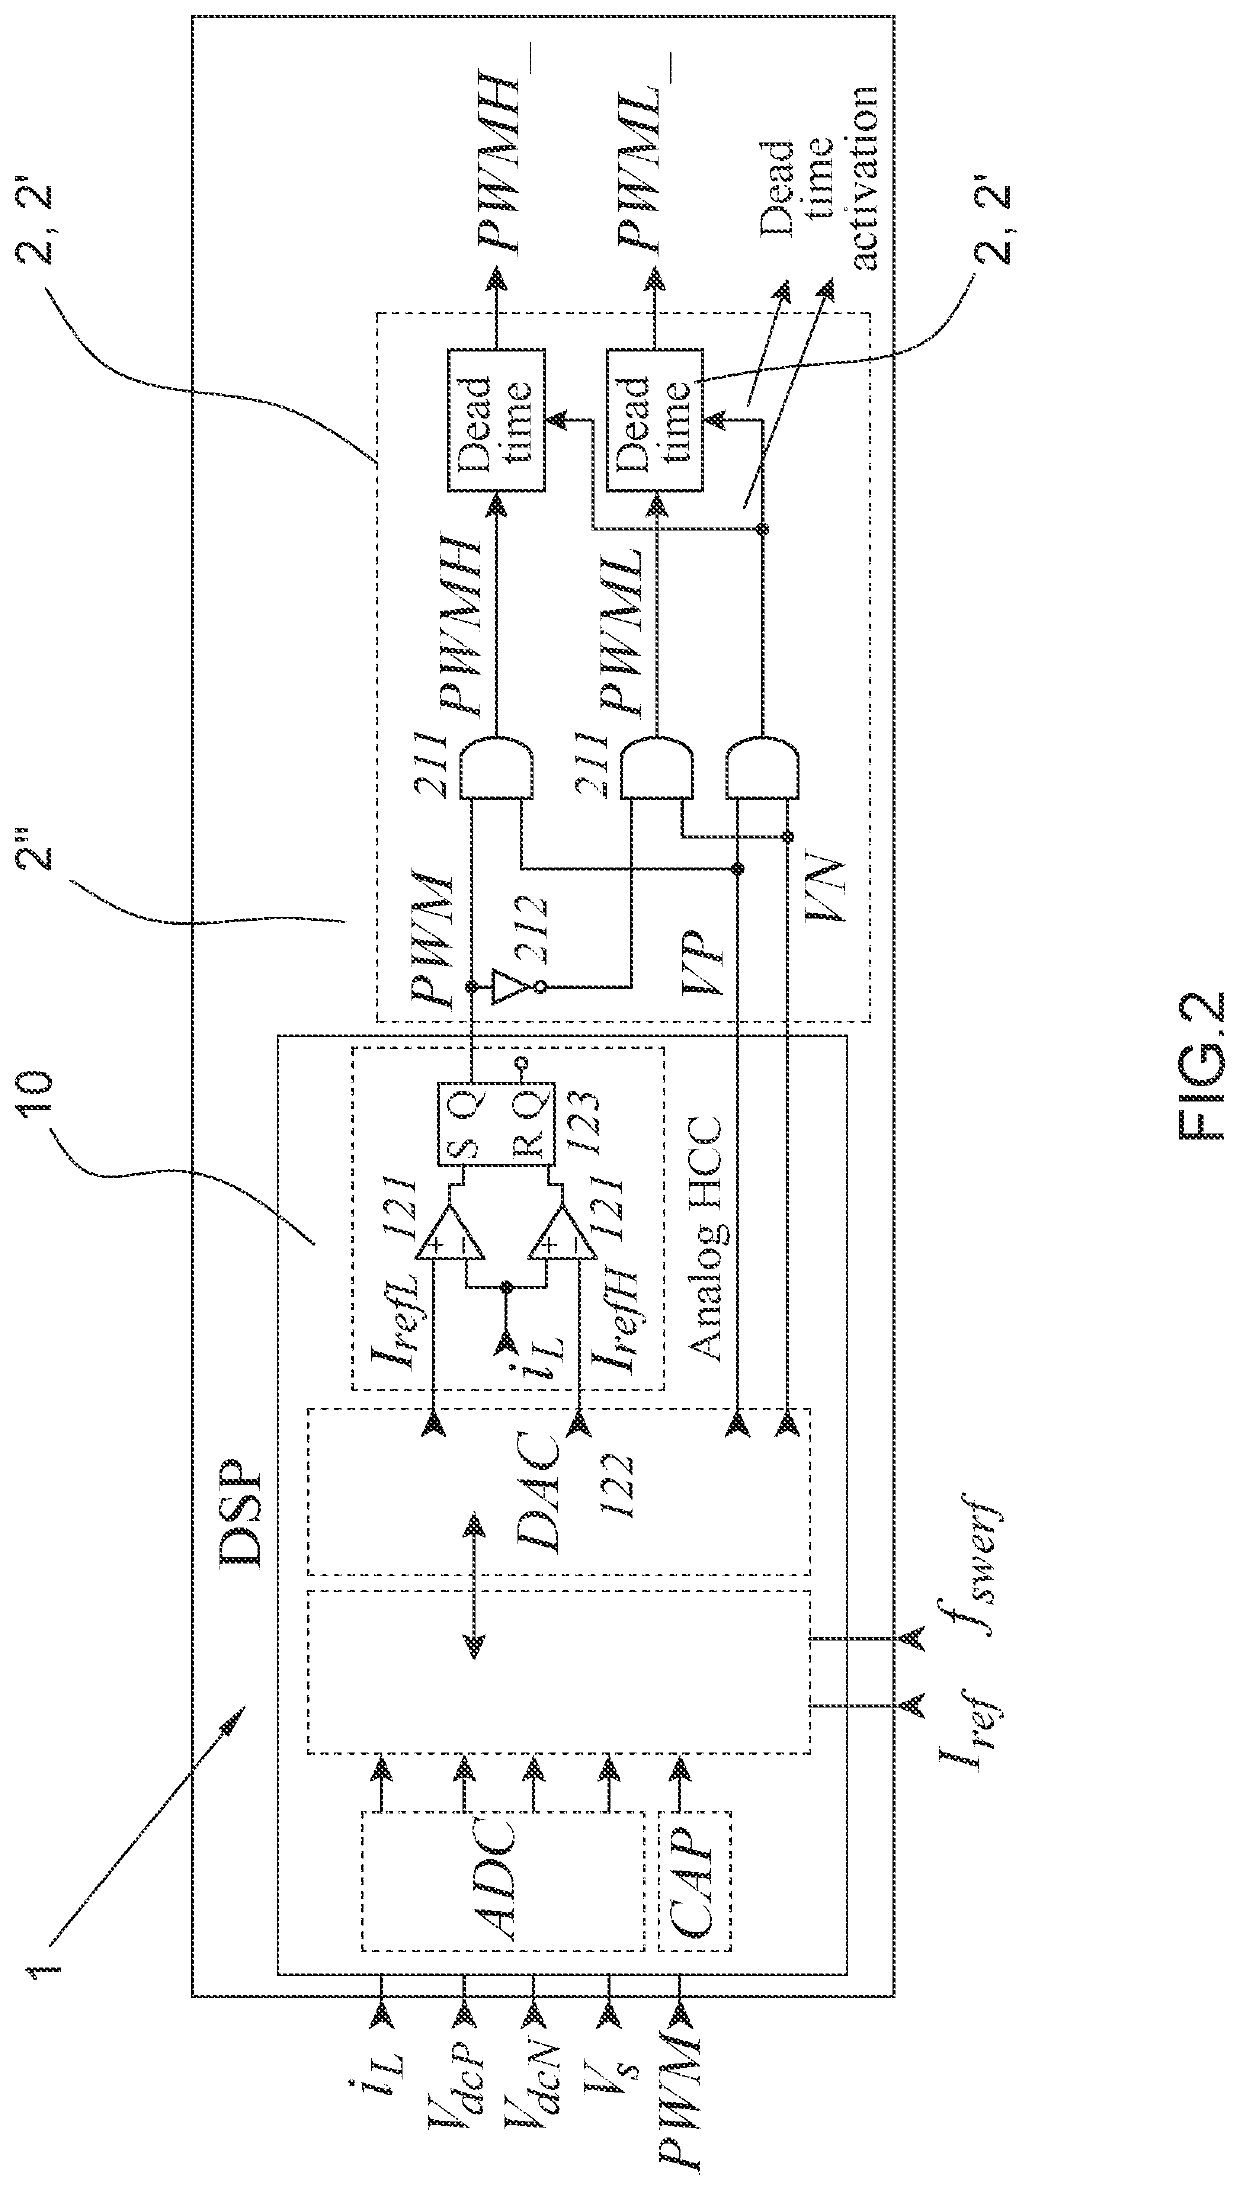 Dead-time control method for power electronics converters and a circuit for the application of this method